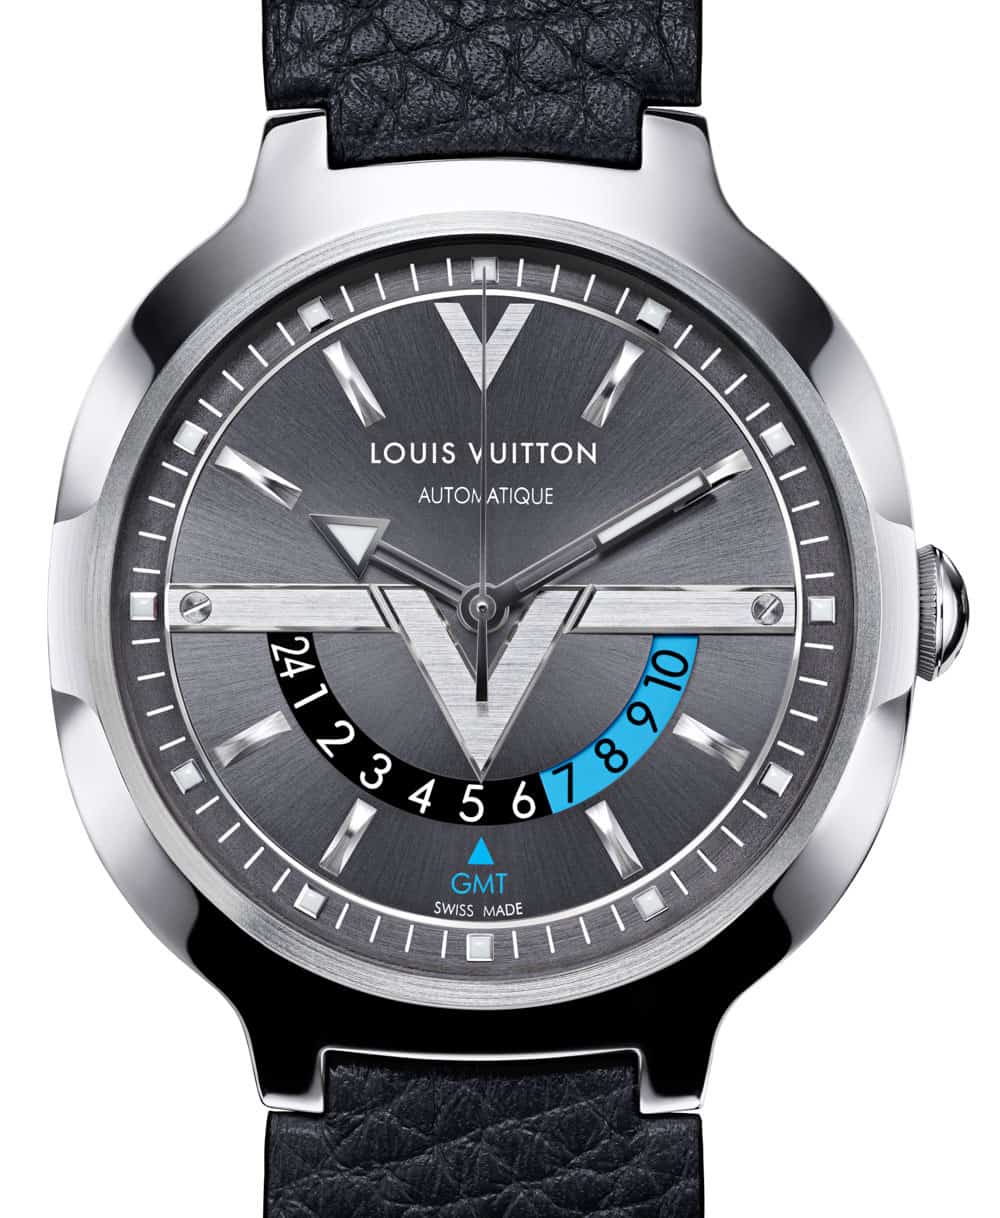 The Classy Louis Vuitton Voyager GMT Will Keep You Company